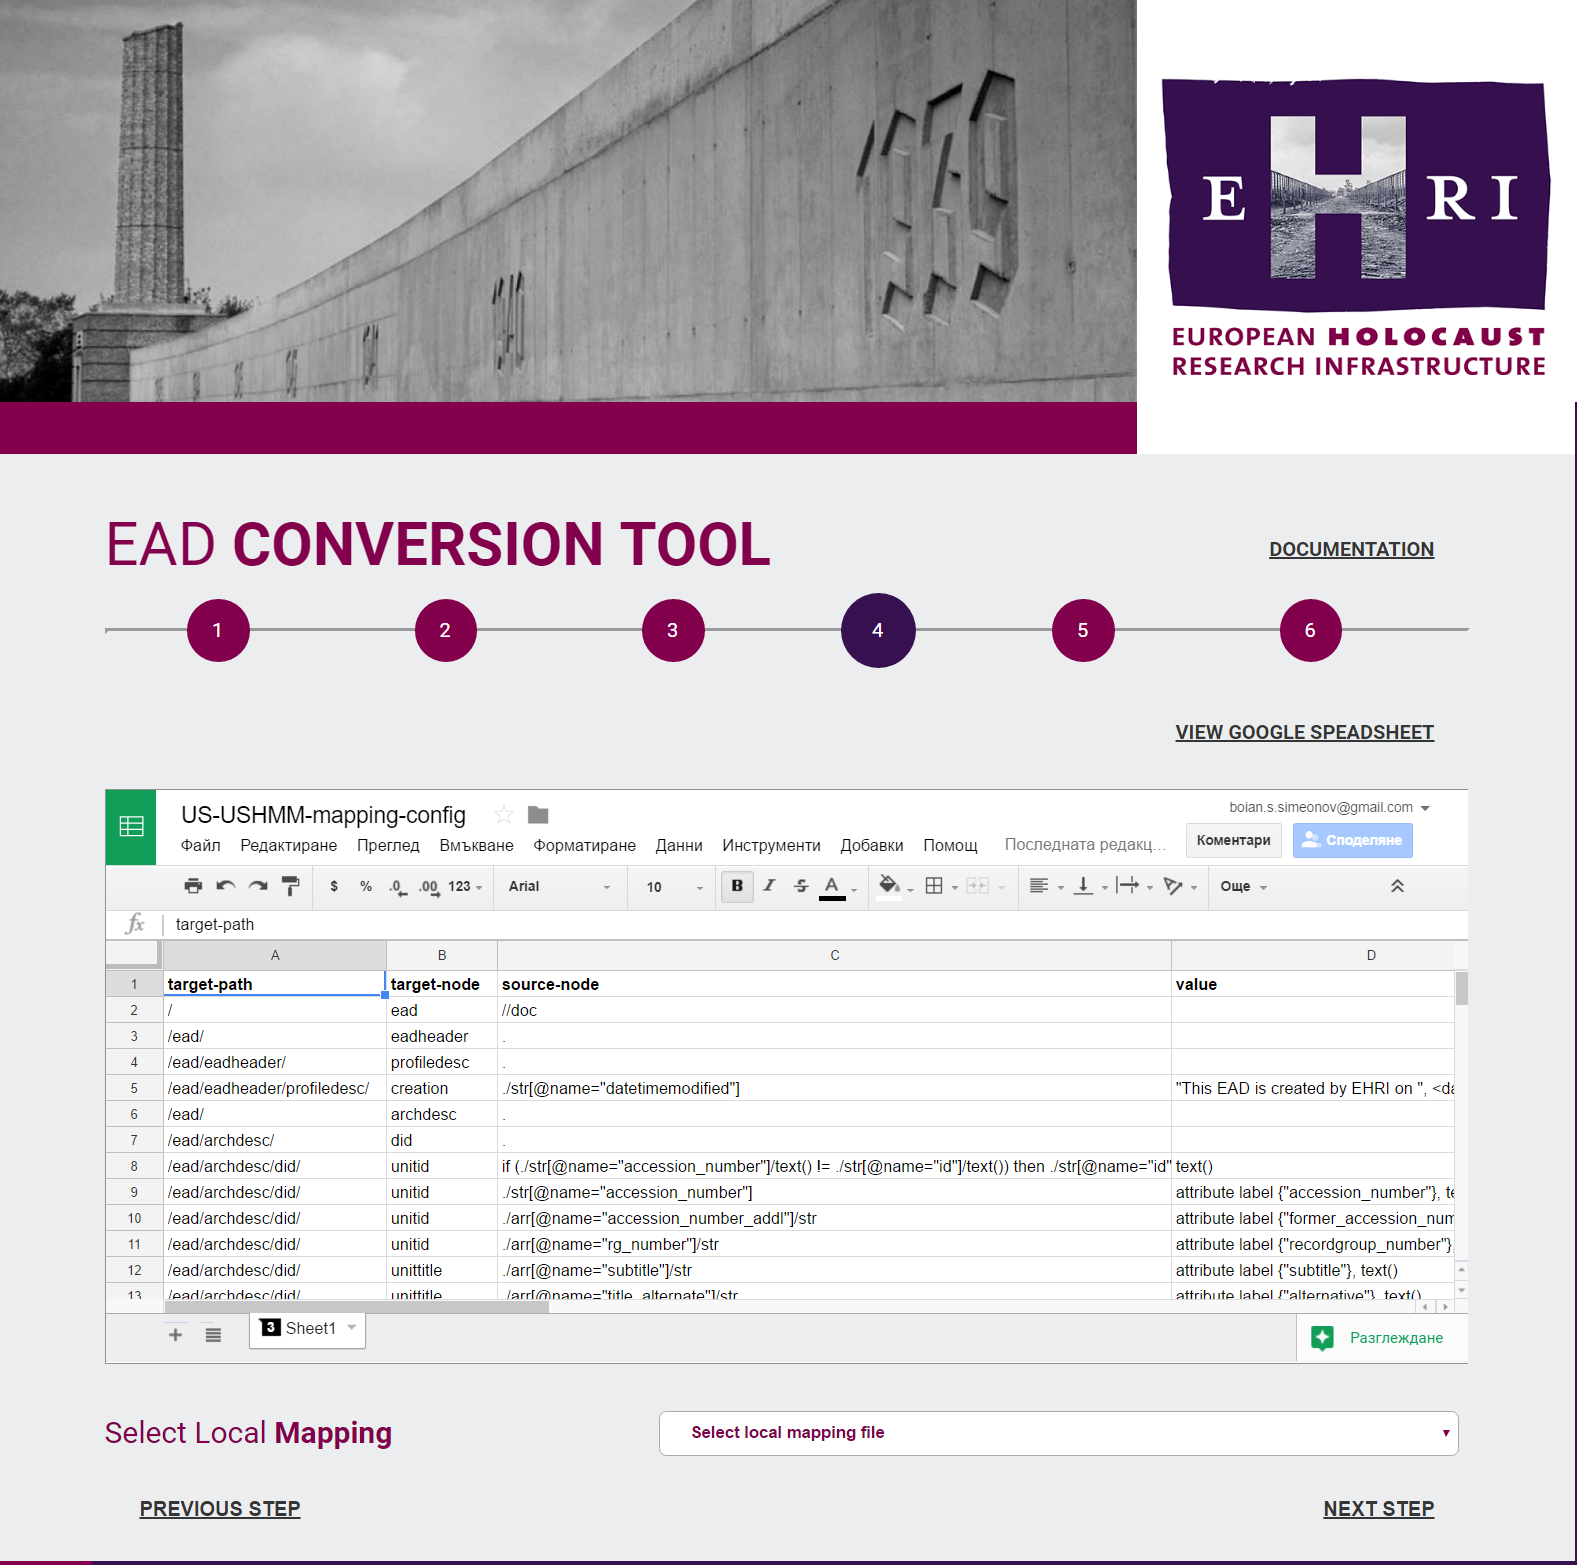 EHRI EAD Conversion Tool. Courtesy Ontotext Corp